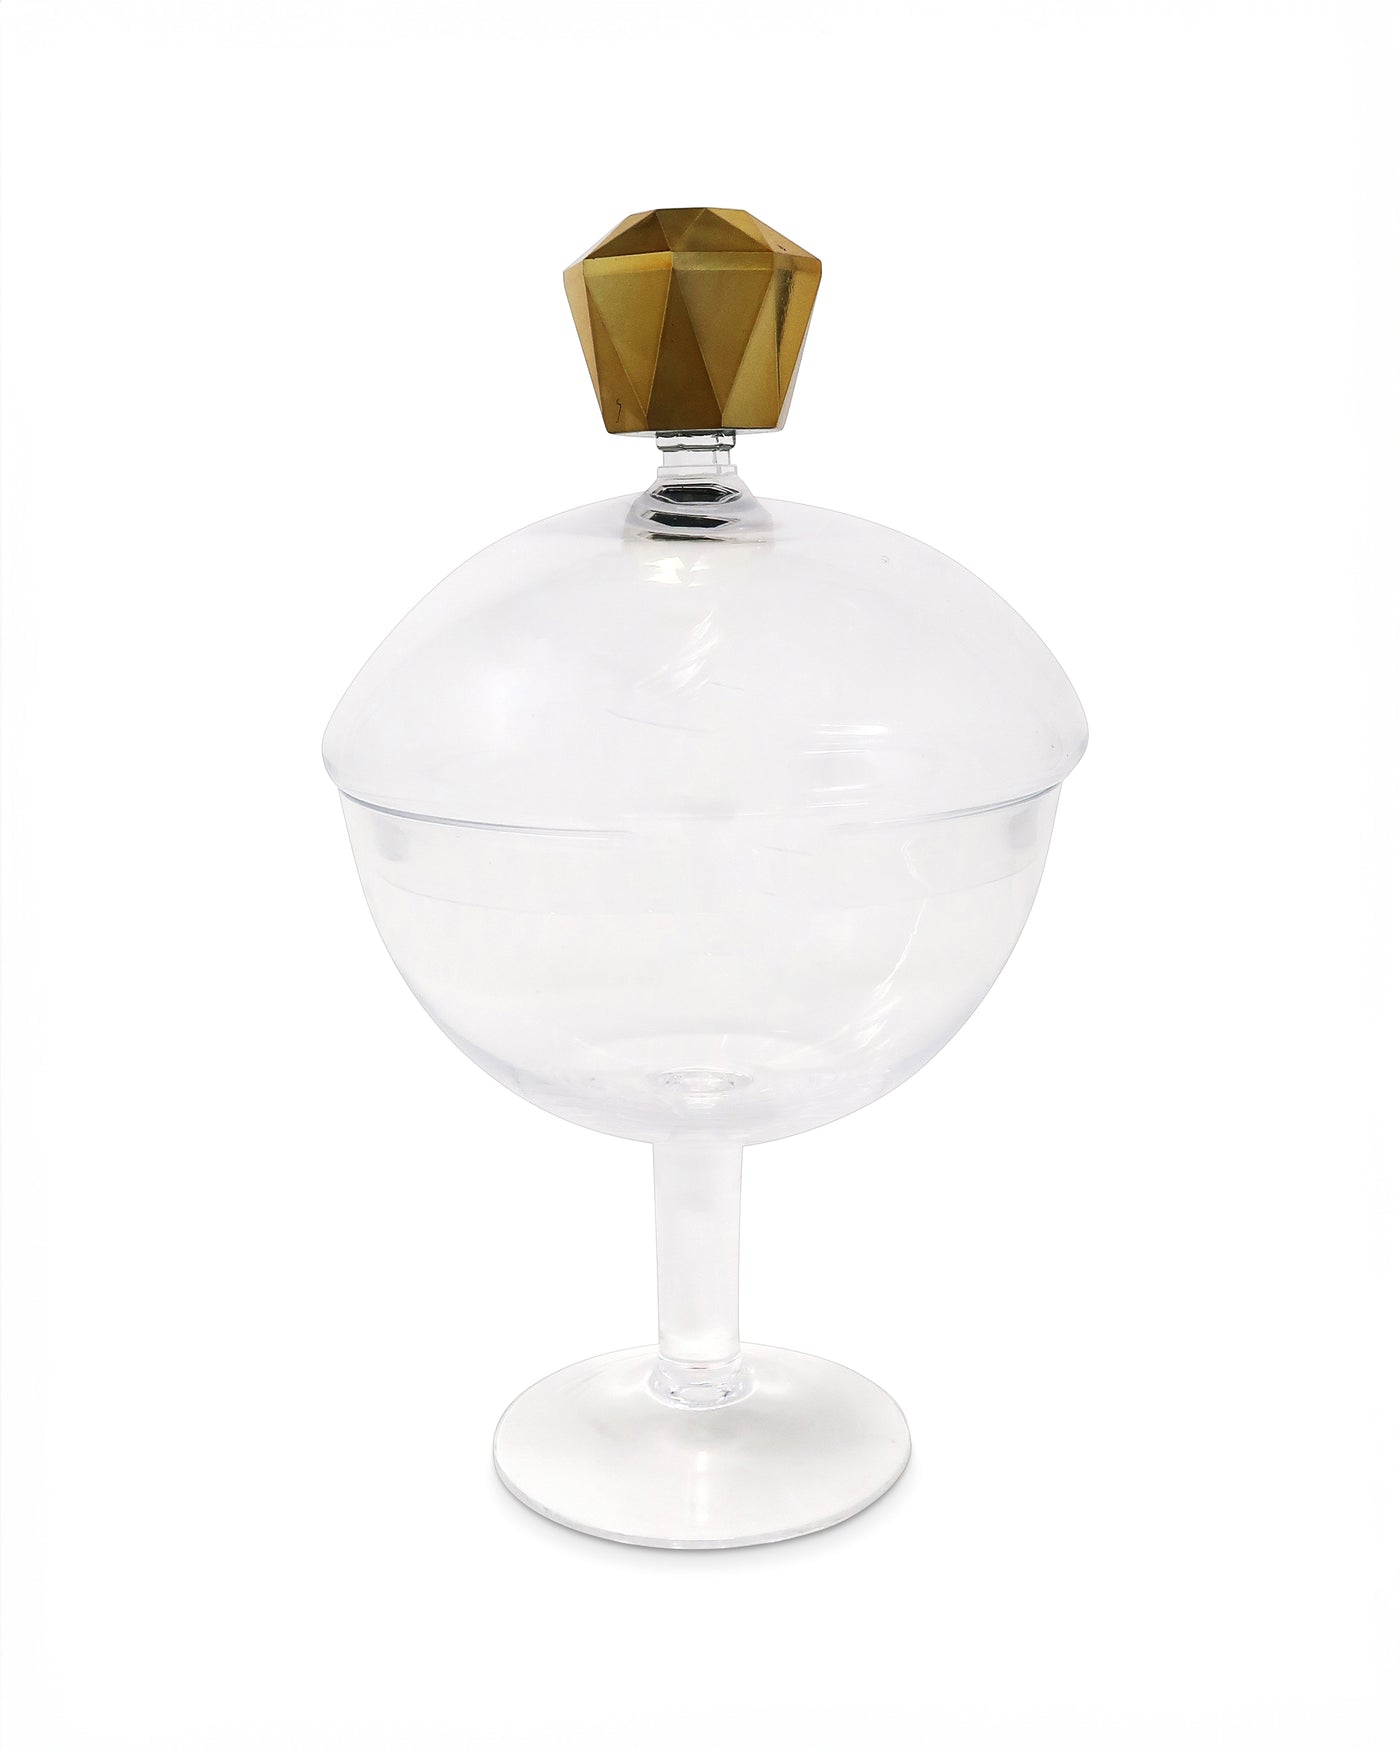 Glass Footed Jar with Colored Diamond Shaped Handle (2 sizes)